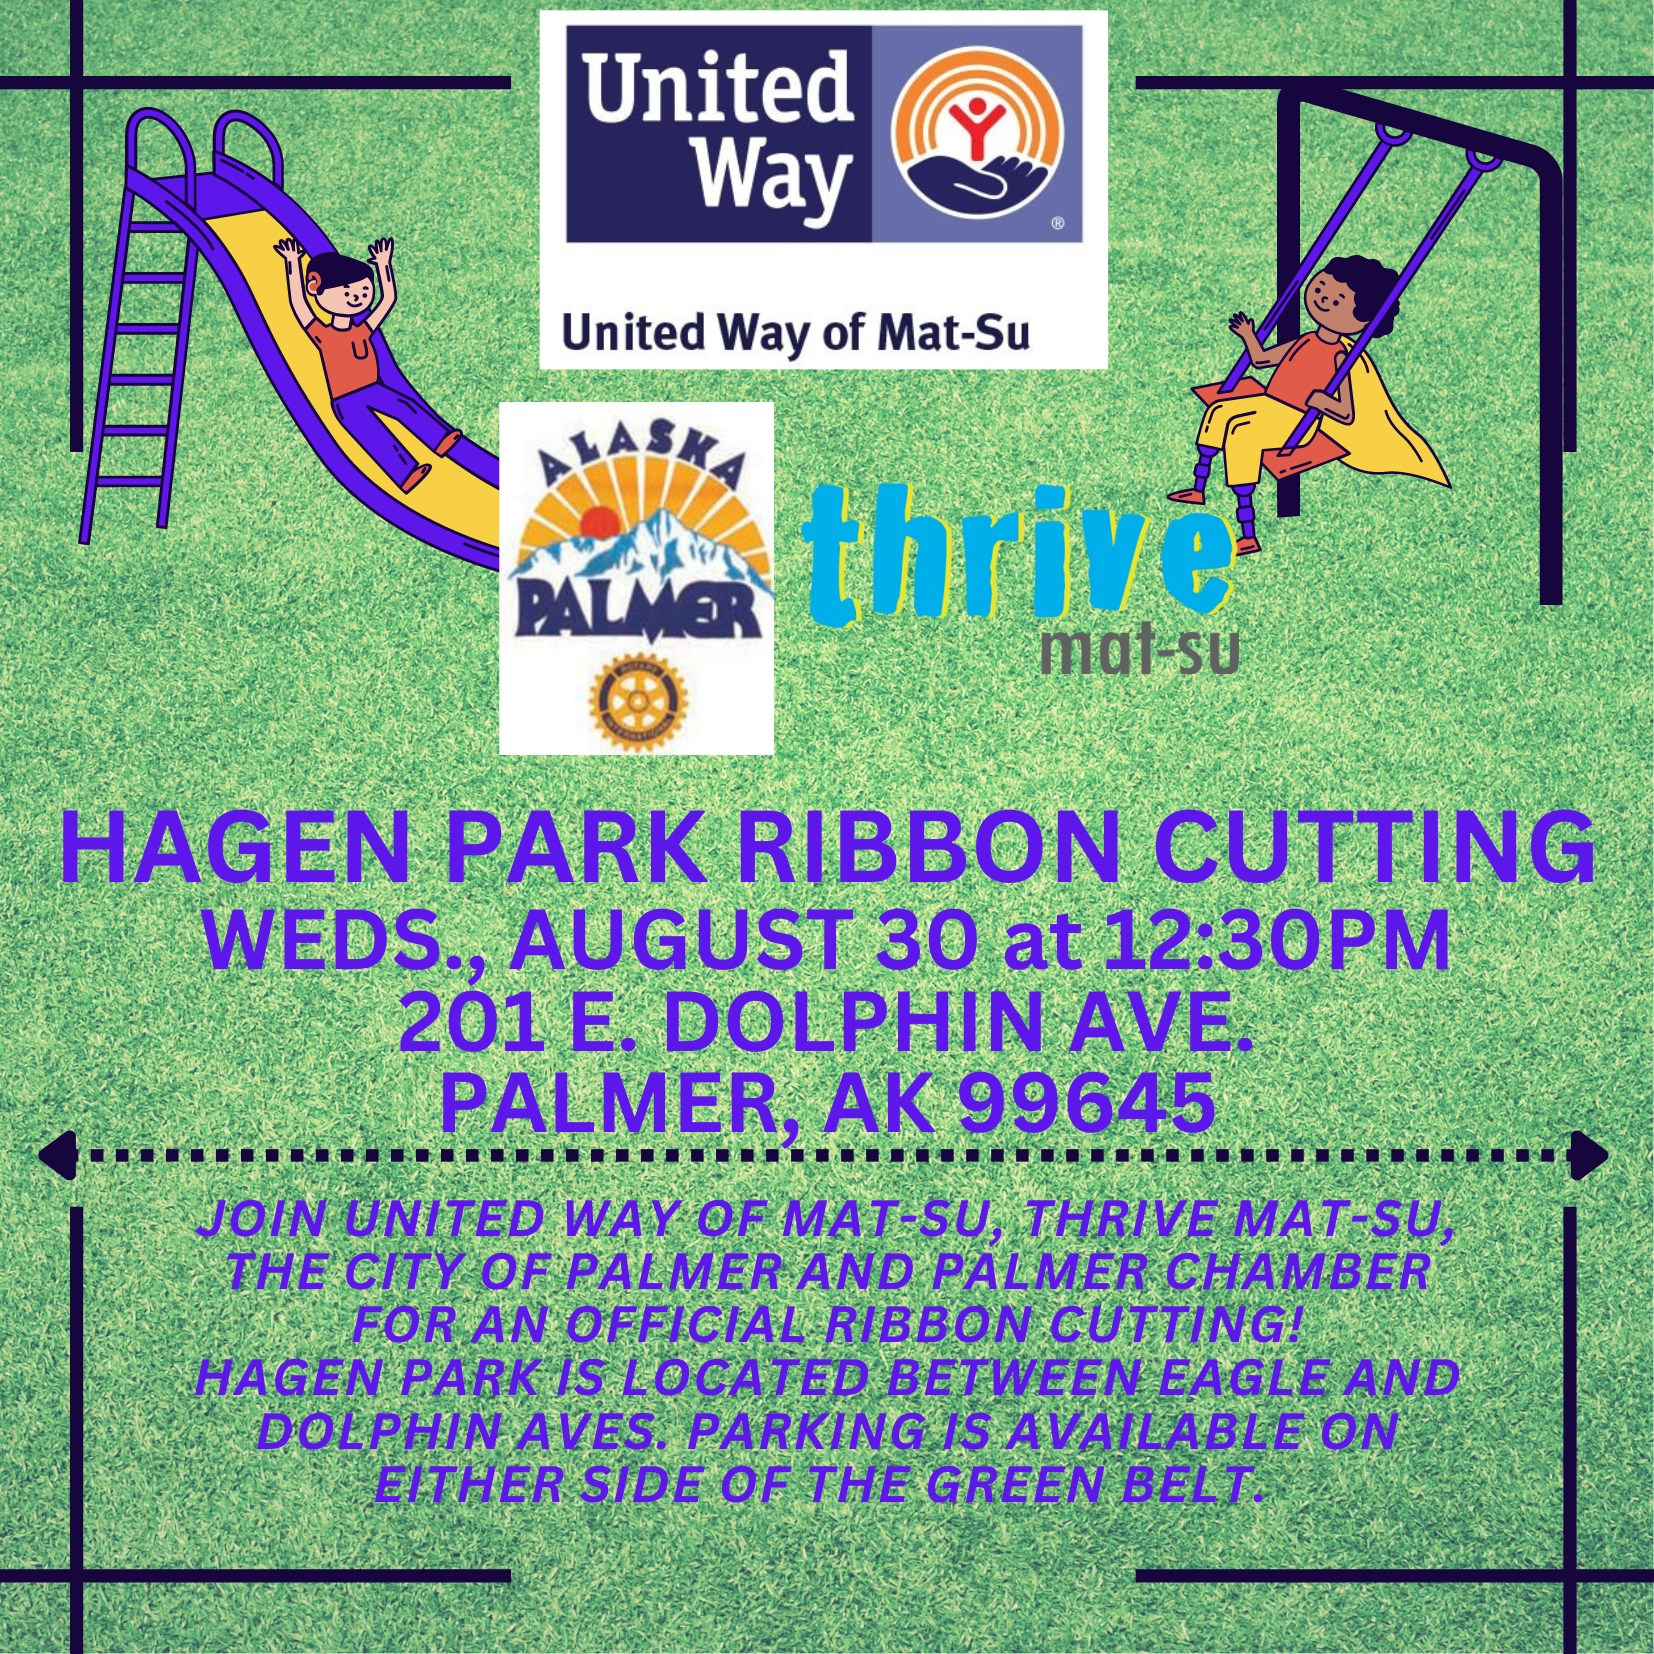 Flyer detailing a park ribbon cutting in Palmer